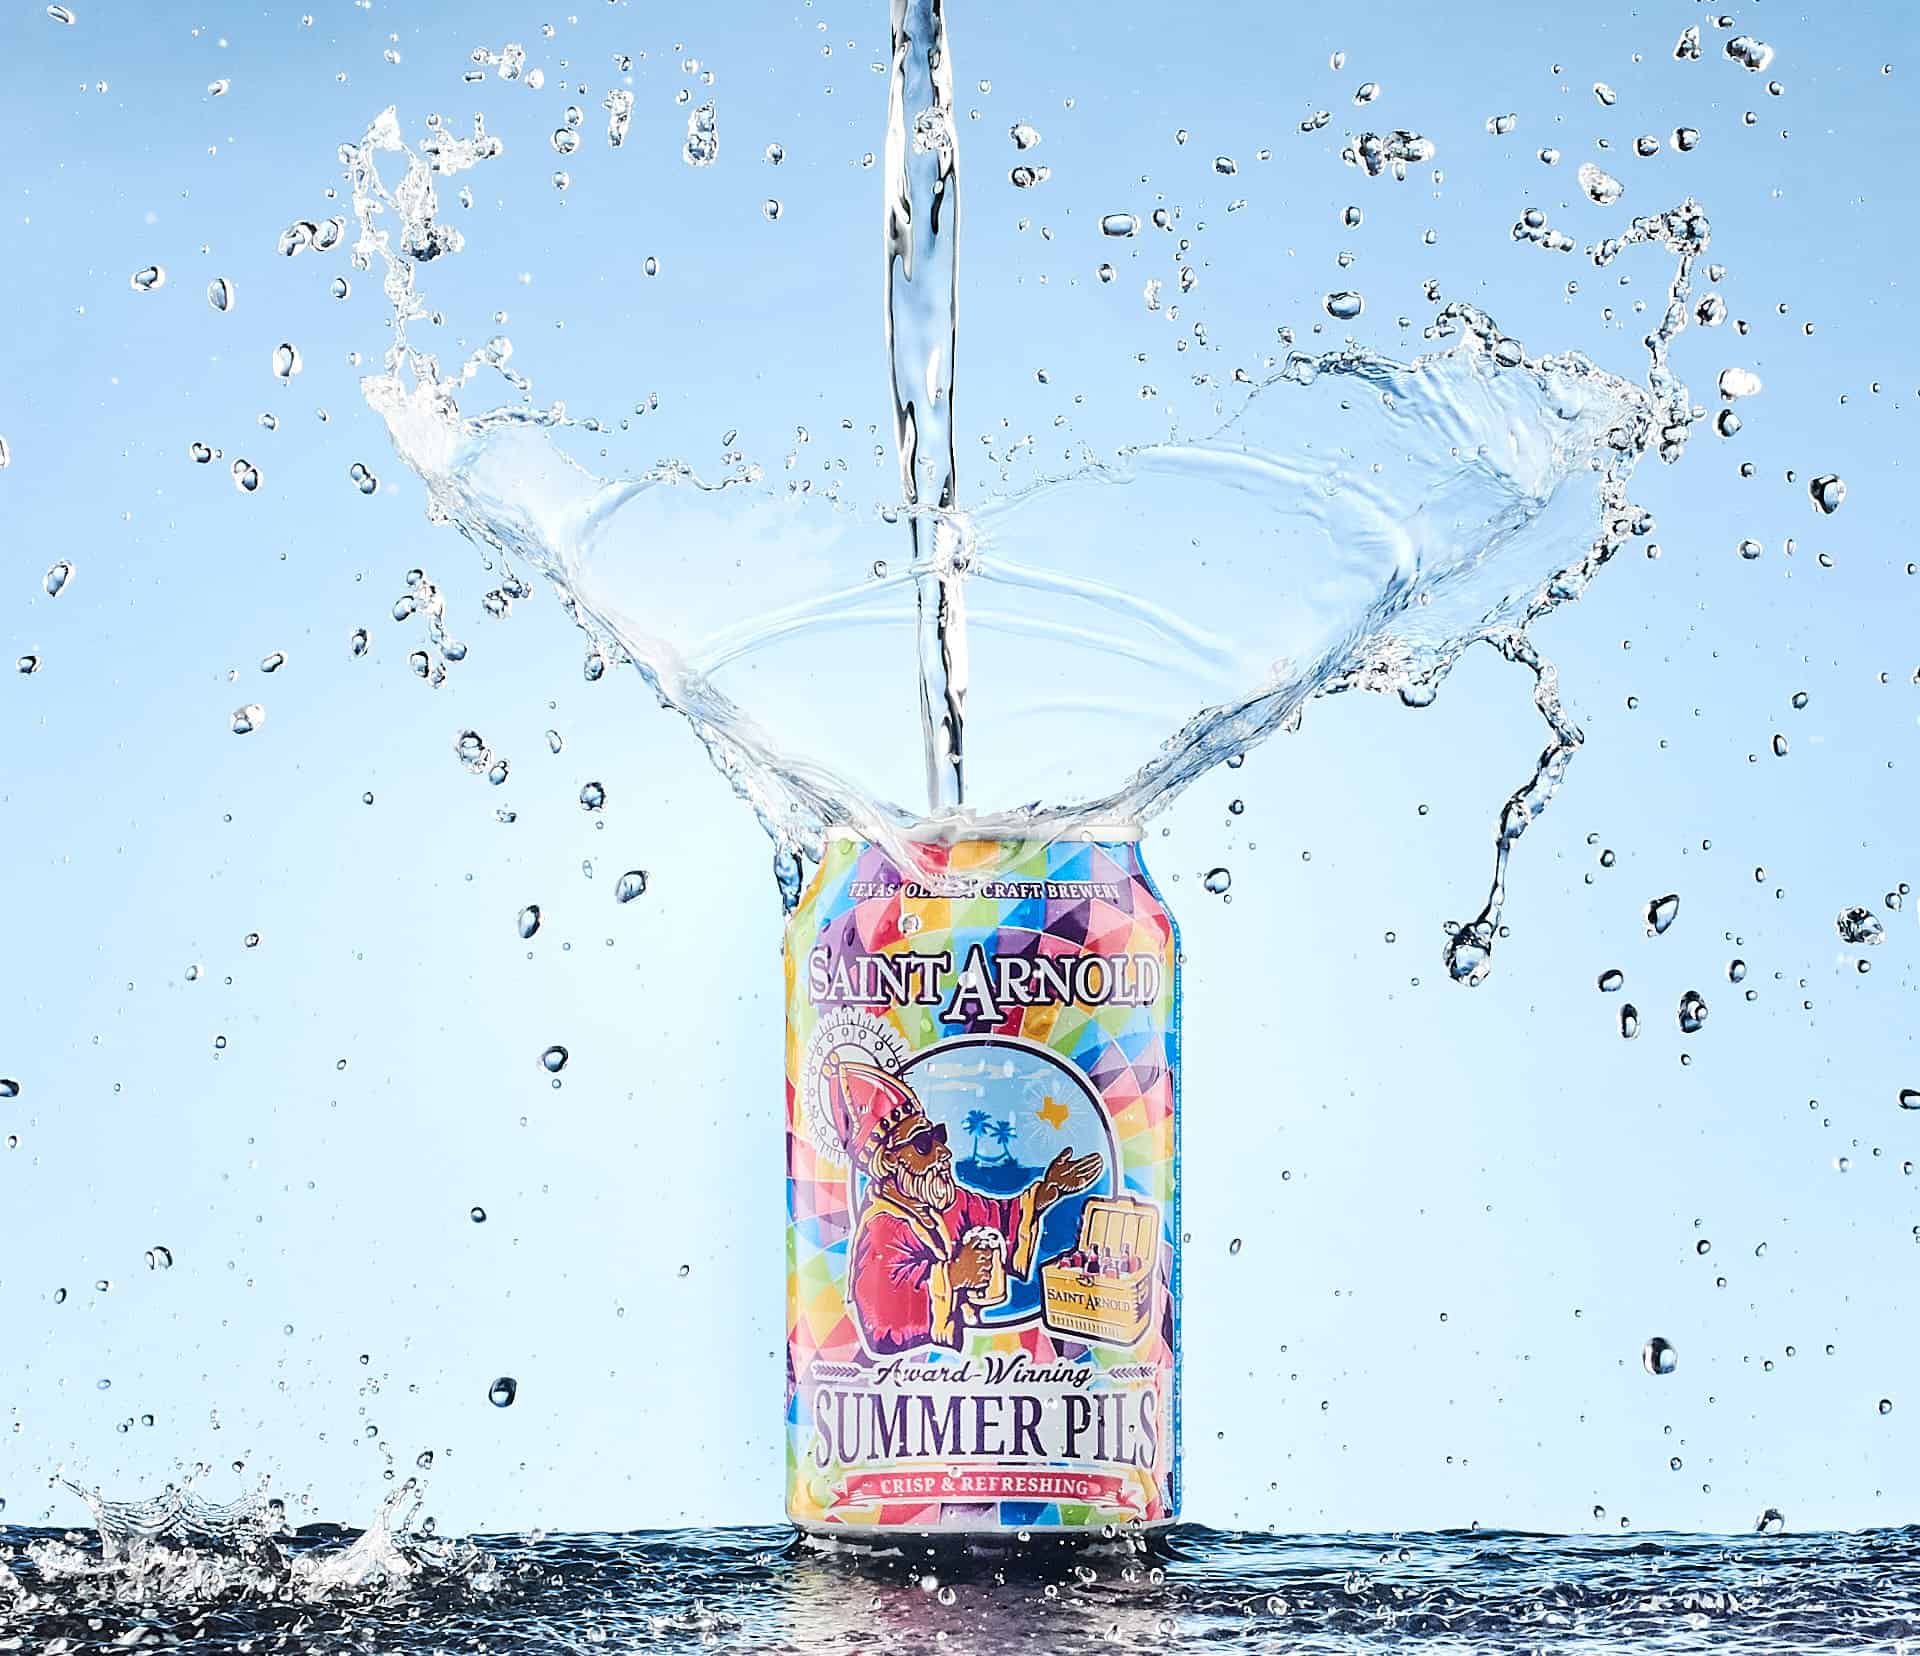 Saint Arnold Beer splashed with water.